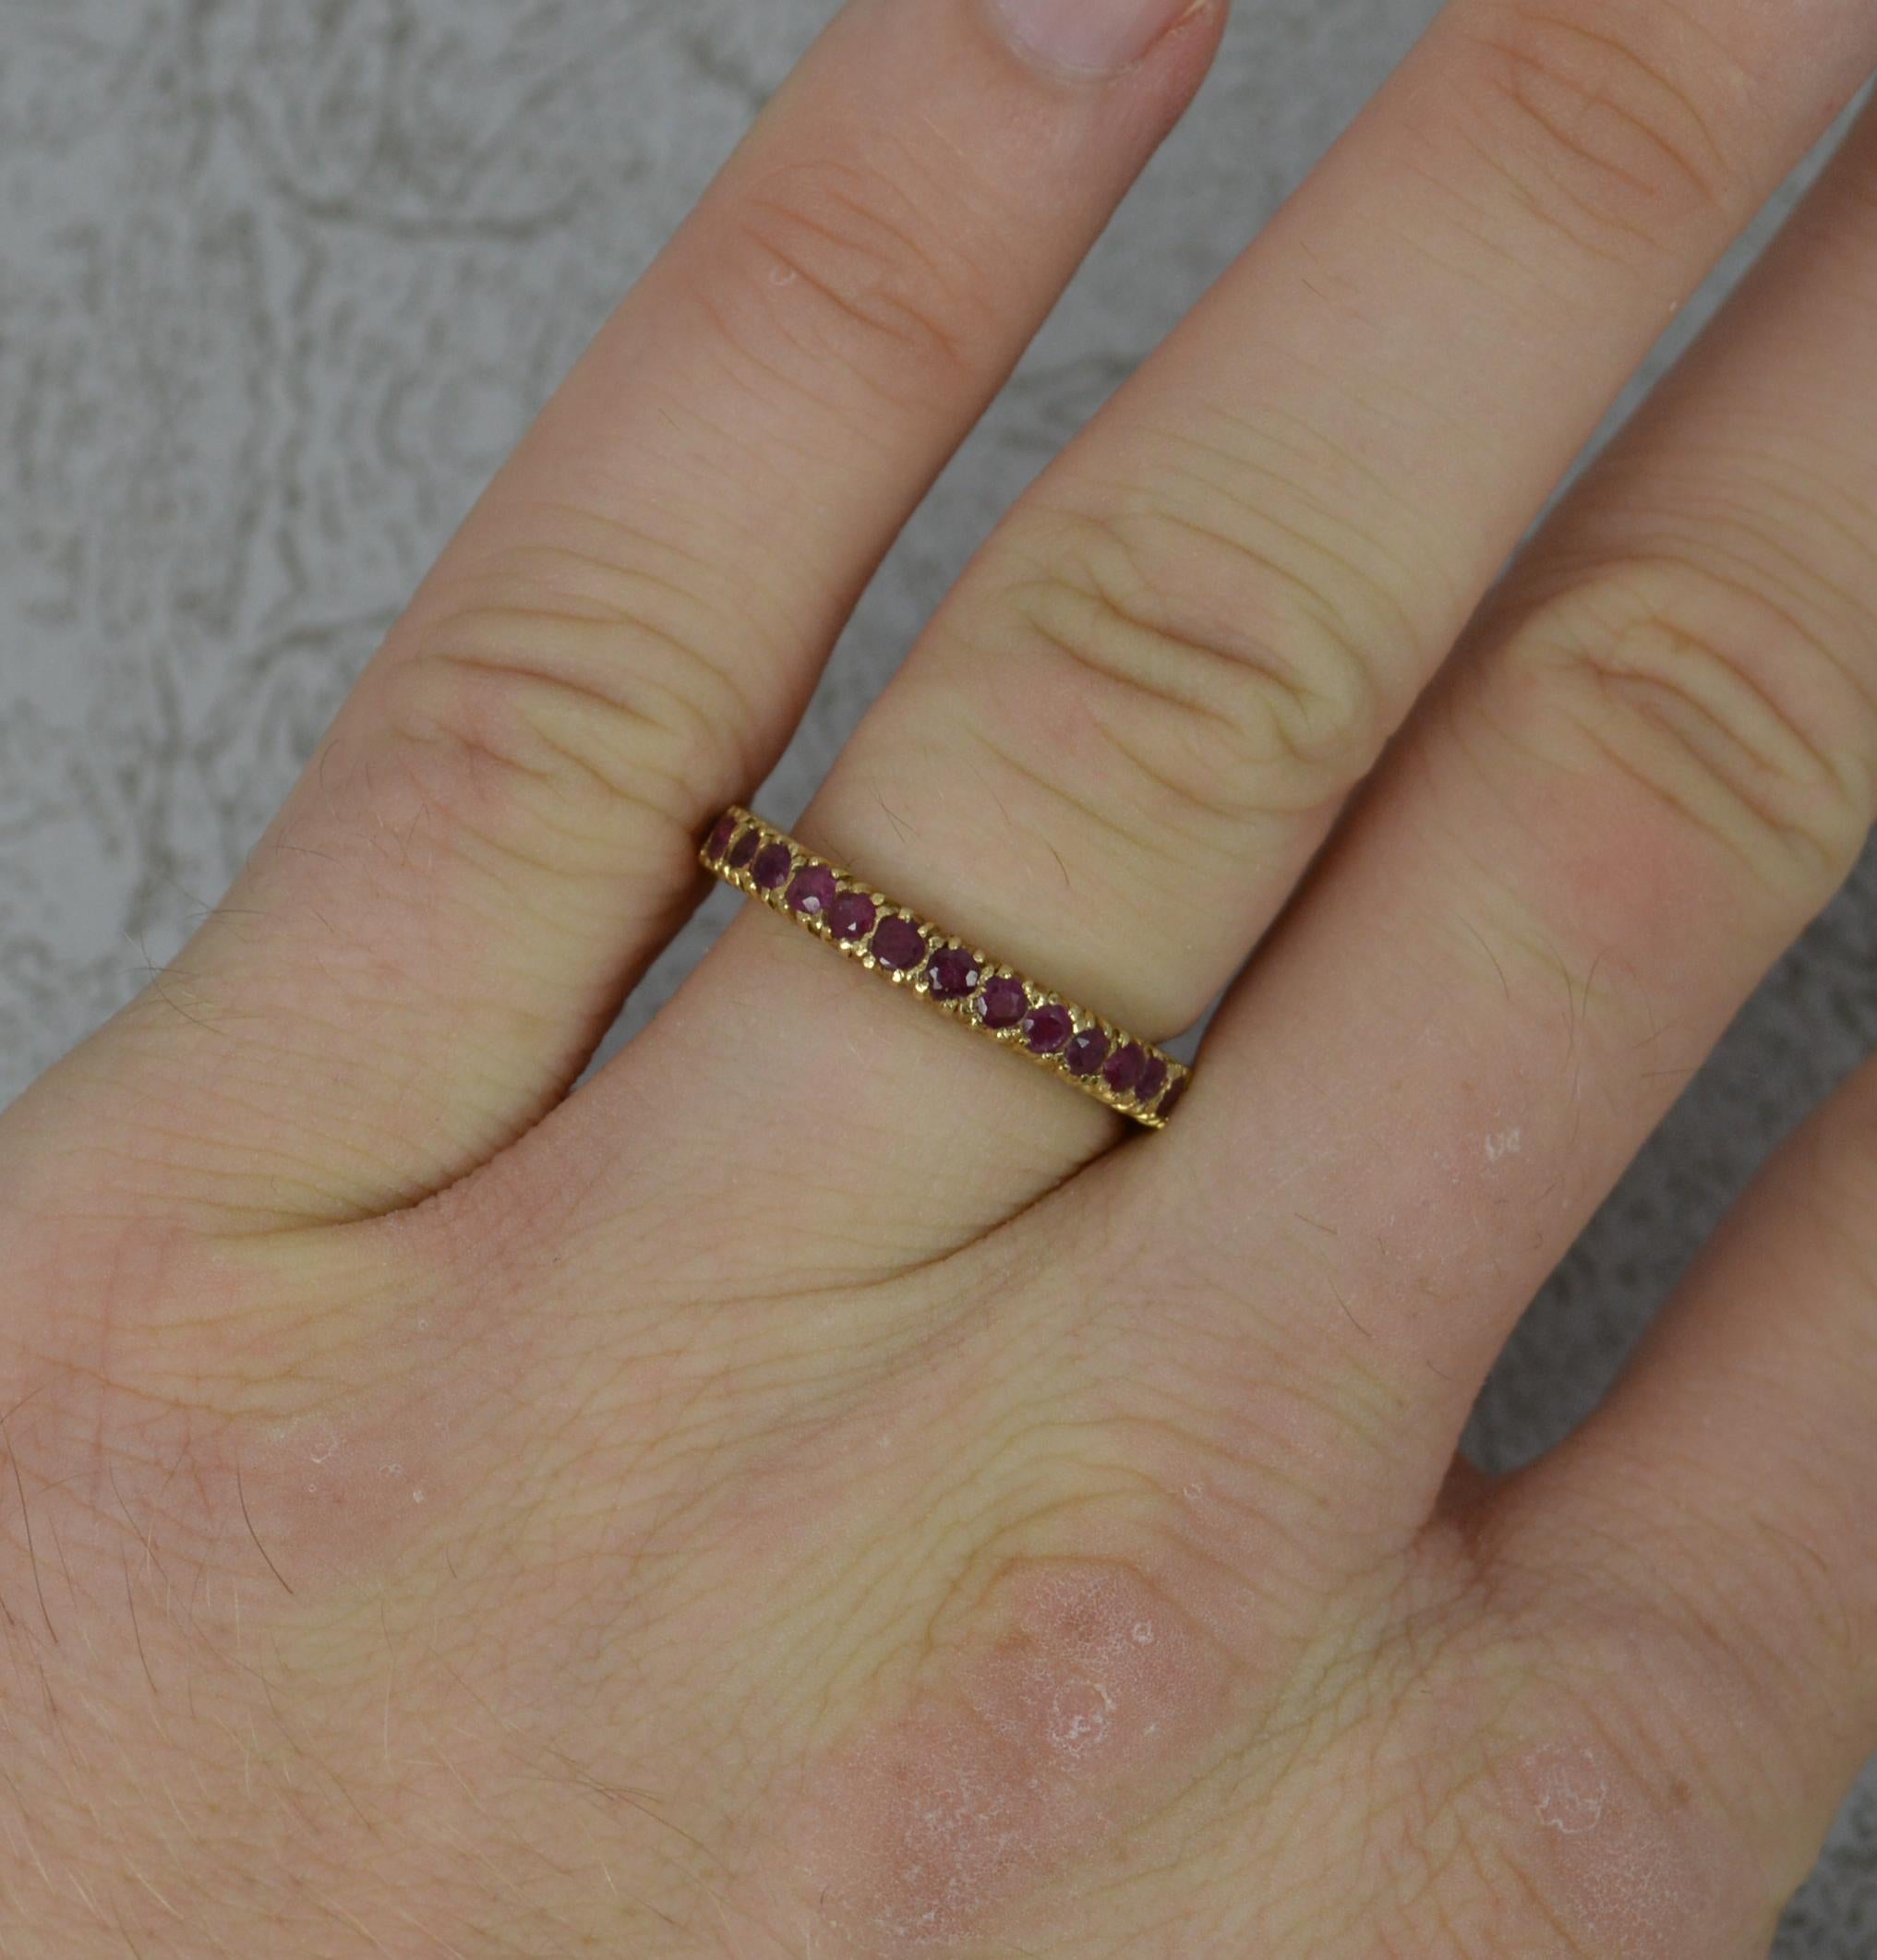 A 14 carat yellow gold and ruby ring.
Full eternity band comprising of over 30 natural round cut rubies.
3mm wide band throughout. Protruding 2.9mm off the finger.

CONDITION ; Very good. Well set stones, issue free. Clean and crisp design. Please